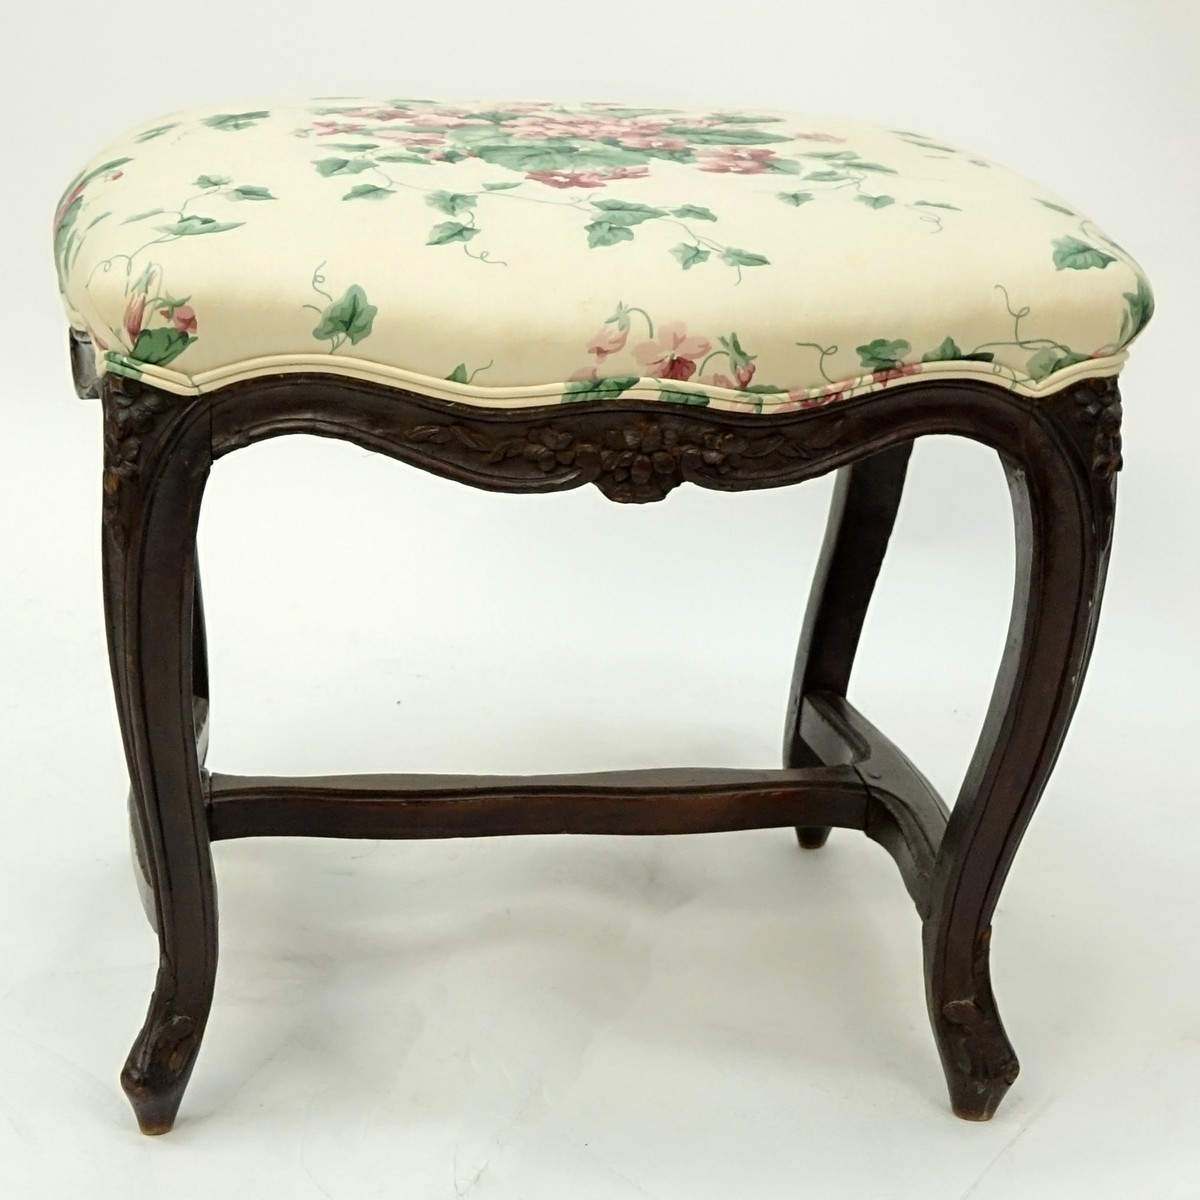 19th Century Louis XV French Carved Wood and Upholstered Tabouret Stool. Scratches to wood. Measure